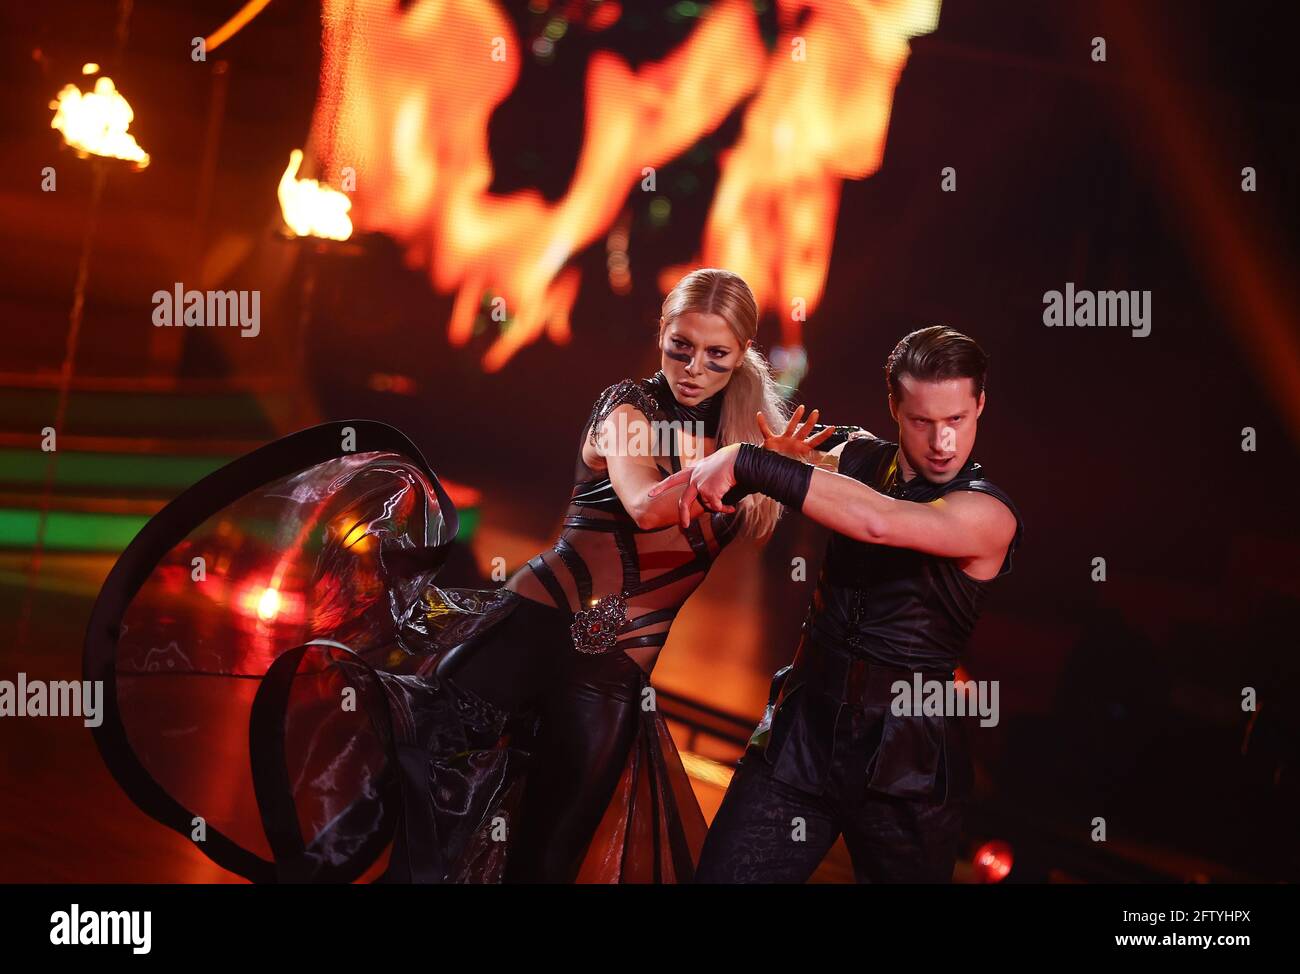 Cologne, Germany. 21st May, 2021. Actress Valentina Pahde and professional dancer Valentin Lusin dance a Paso Doble on the RTL dance show 'Let's Dance'. Credit: Rolf Vennenbernd/dpa-Pool/dpa/Alamy Live News Stock Photo